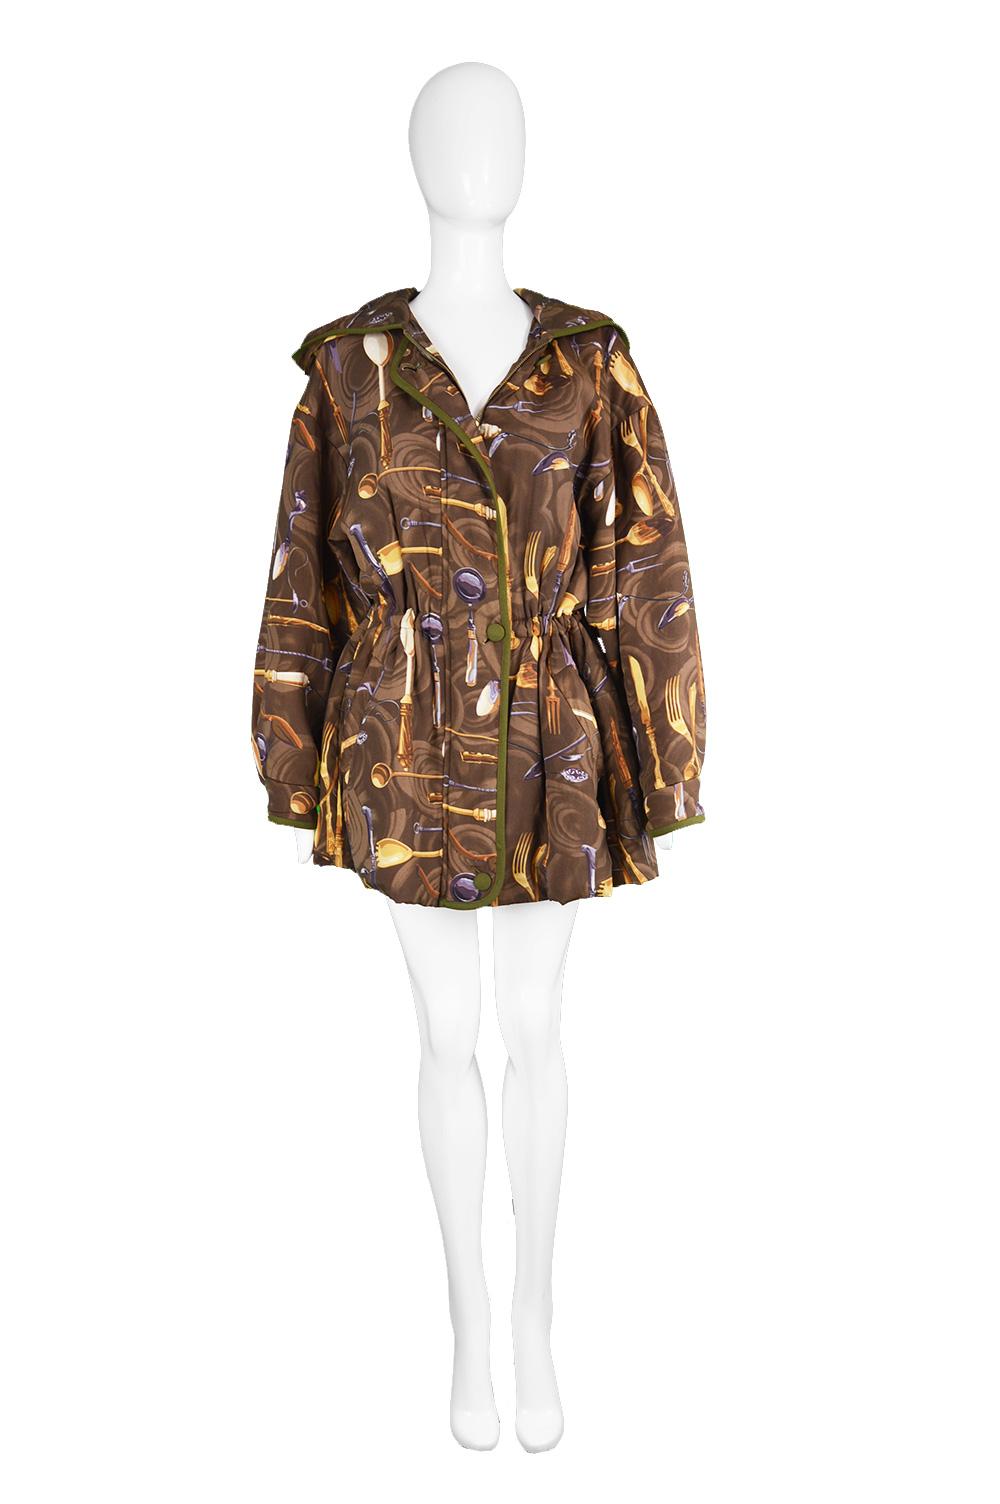 Louis Féraud Vintage Silk Blend Women's Novelty Cutlery Print Parka Coat, 1980s

Size: Marked US 8 / UK 12 / F 40 but would suit a women's Small to Medium due to intentionally loose, batwing fit. Please check measurements & description by clicking